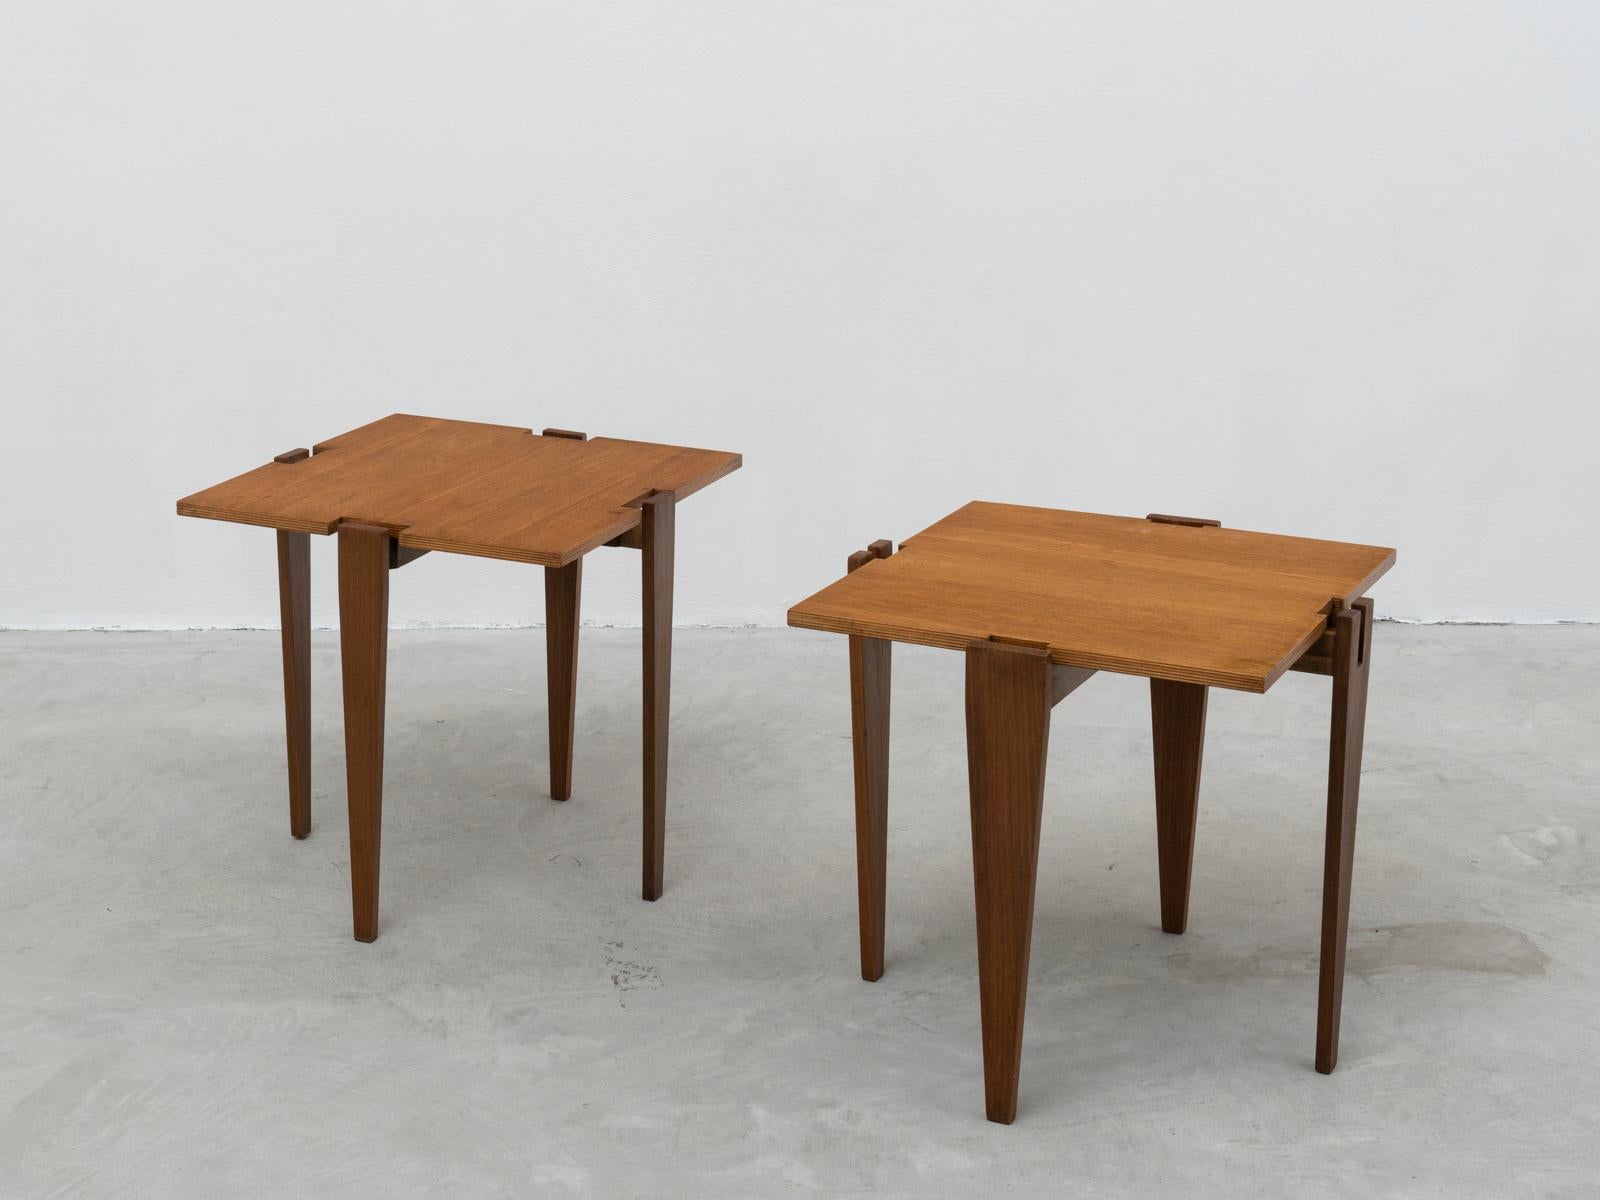 Very rare pair of modernist side tables designed by architects Angelo Ostuni & Renato Forti for Frangi, manufactured by Pietro Sala in 1957. They were presented at the exhibition 